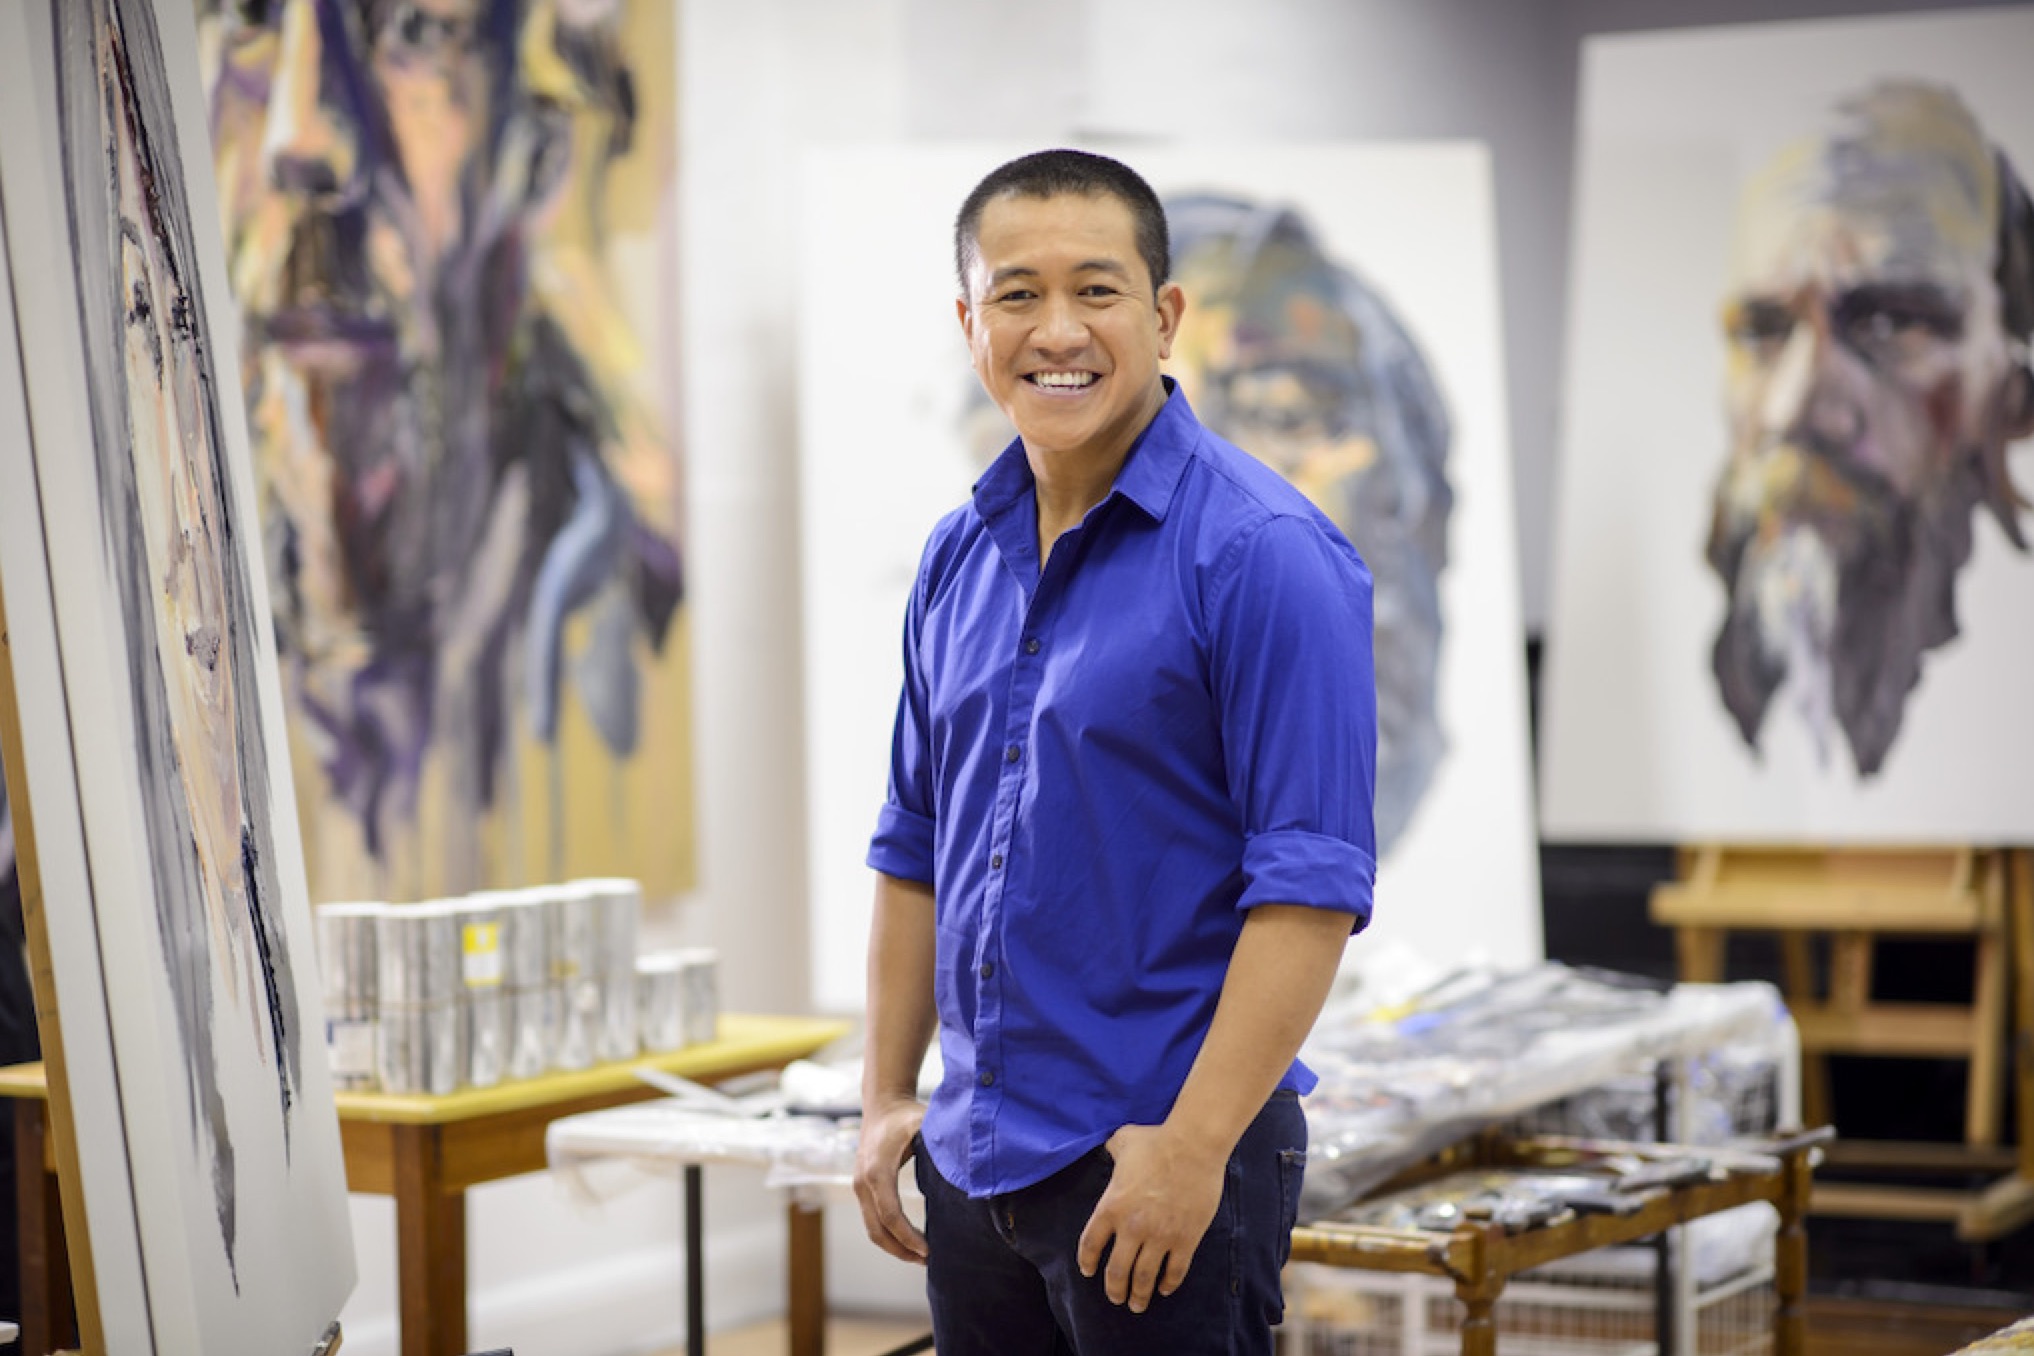   Anh Do  image - supplied/ABCTV 